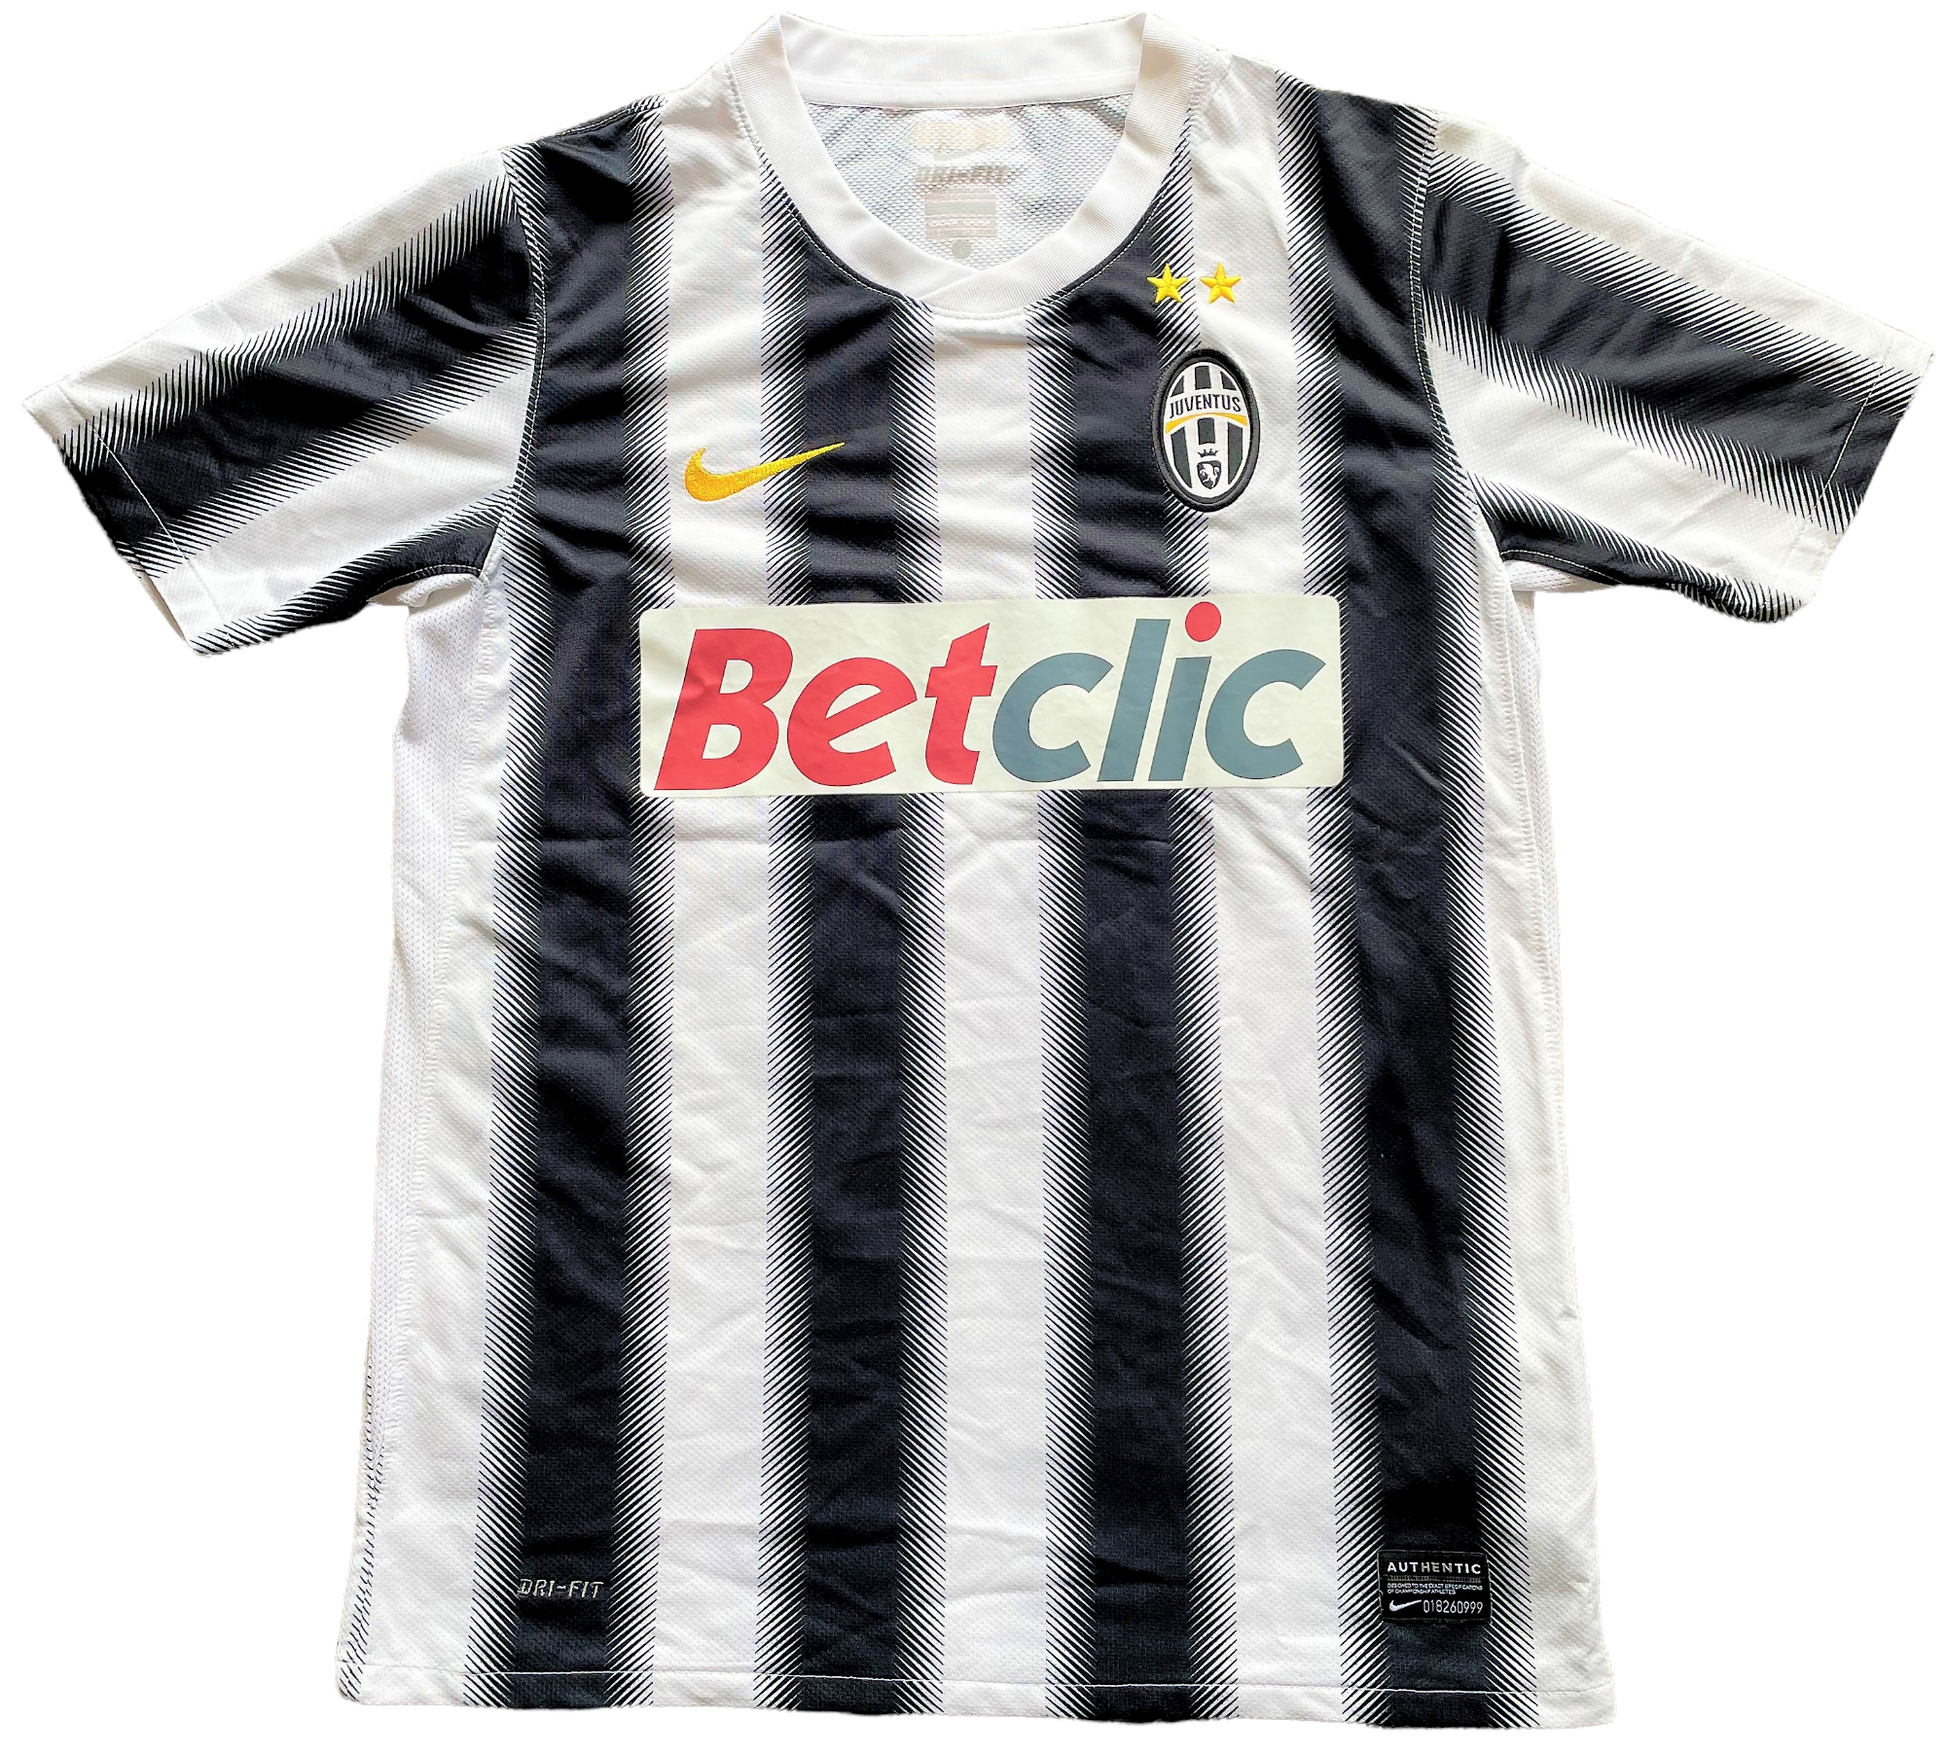 2011-12 Juventus Home Shirt (excellent) 12 to 13 years